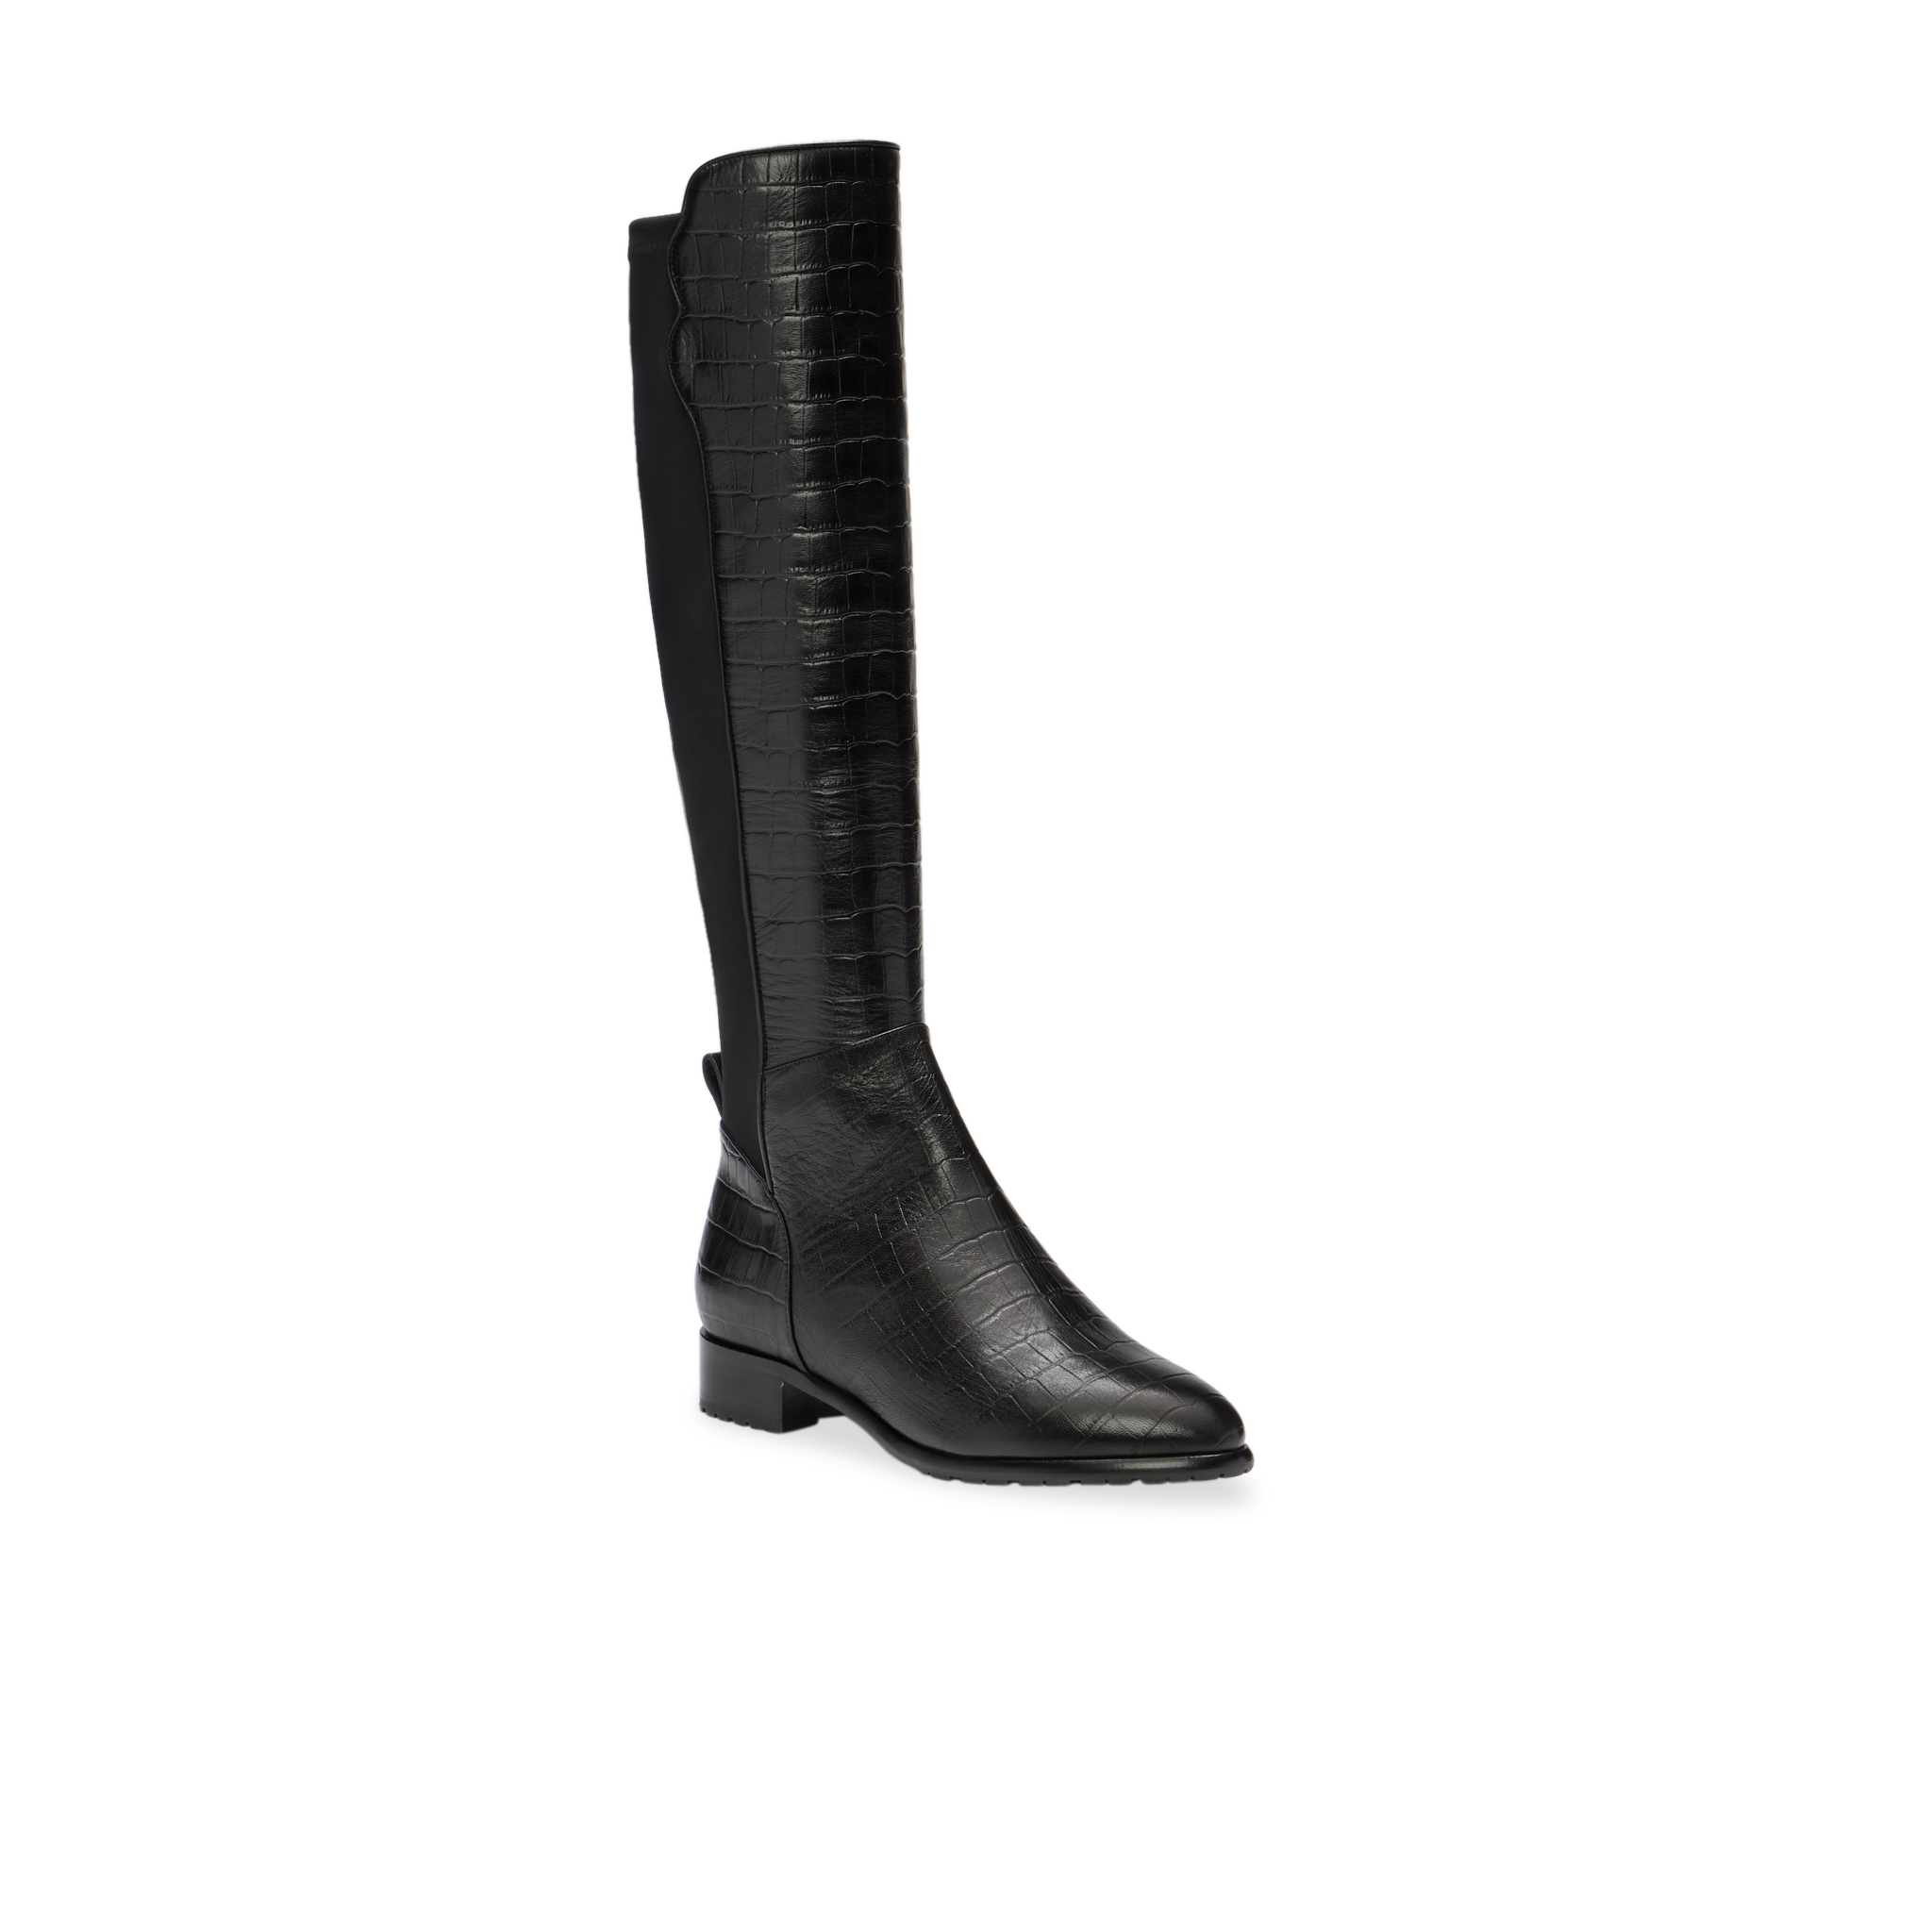 Croc-embossed leather knee-high boots